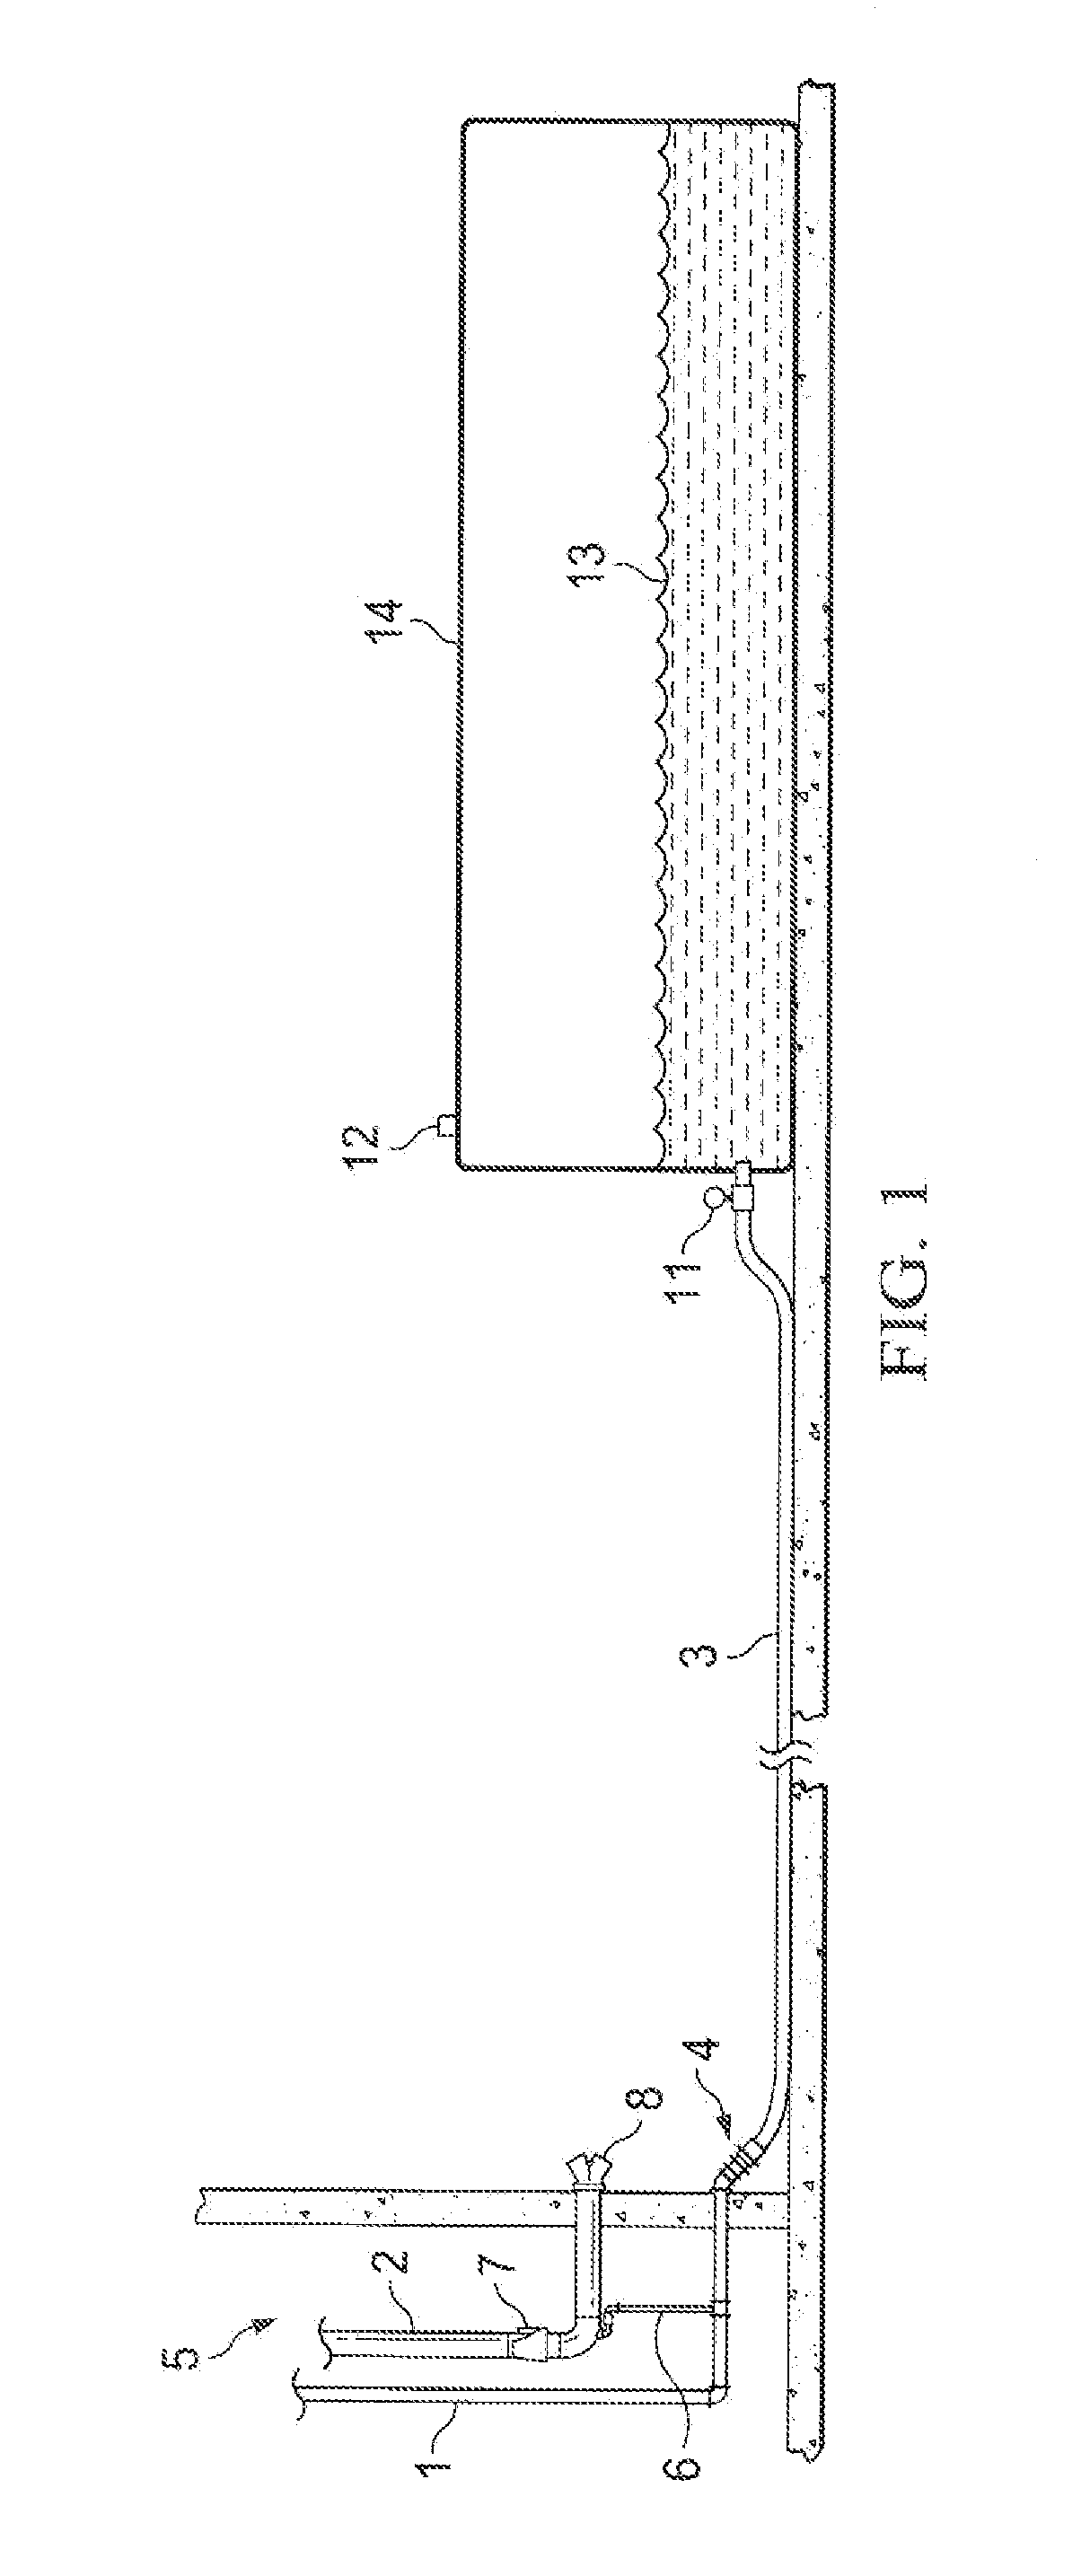 Collection and Recycling System for Contents of Sprinkler System